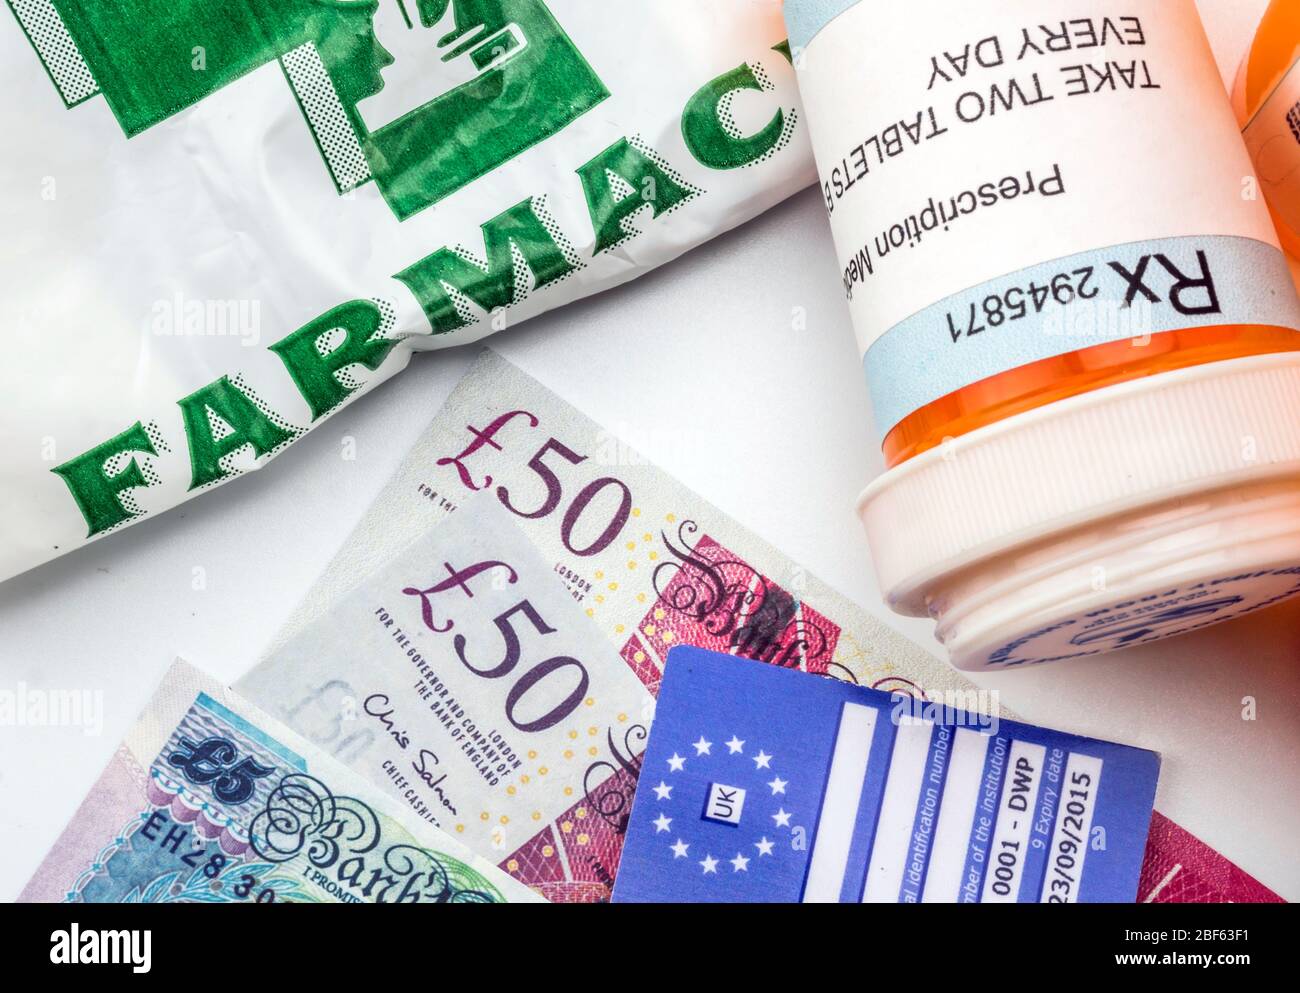 European health insurance card along with several capsules, concept of medical increase in the crisis of the brexit, conceptual image Stock Photo